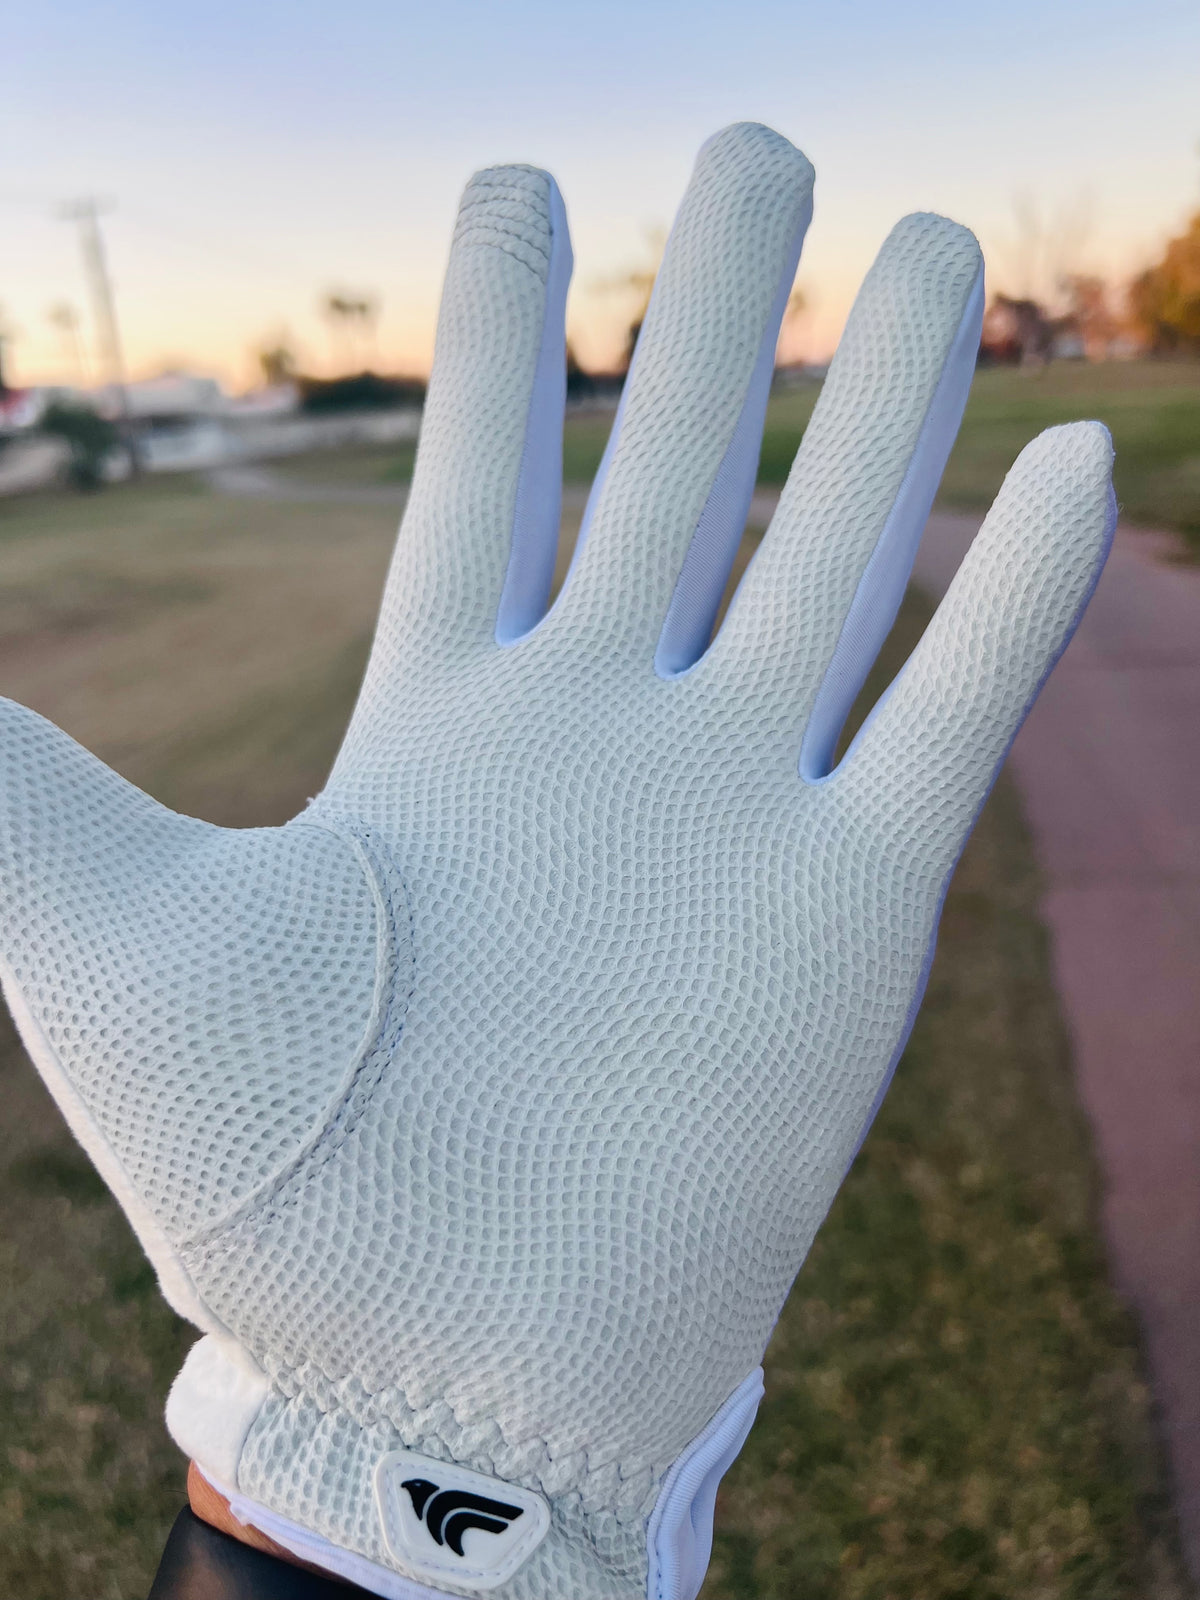 Rose - New Traditional all White Glove